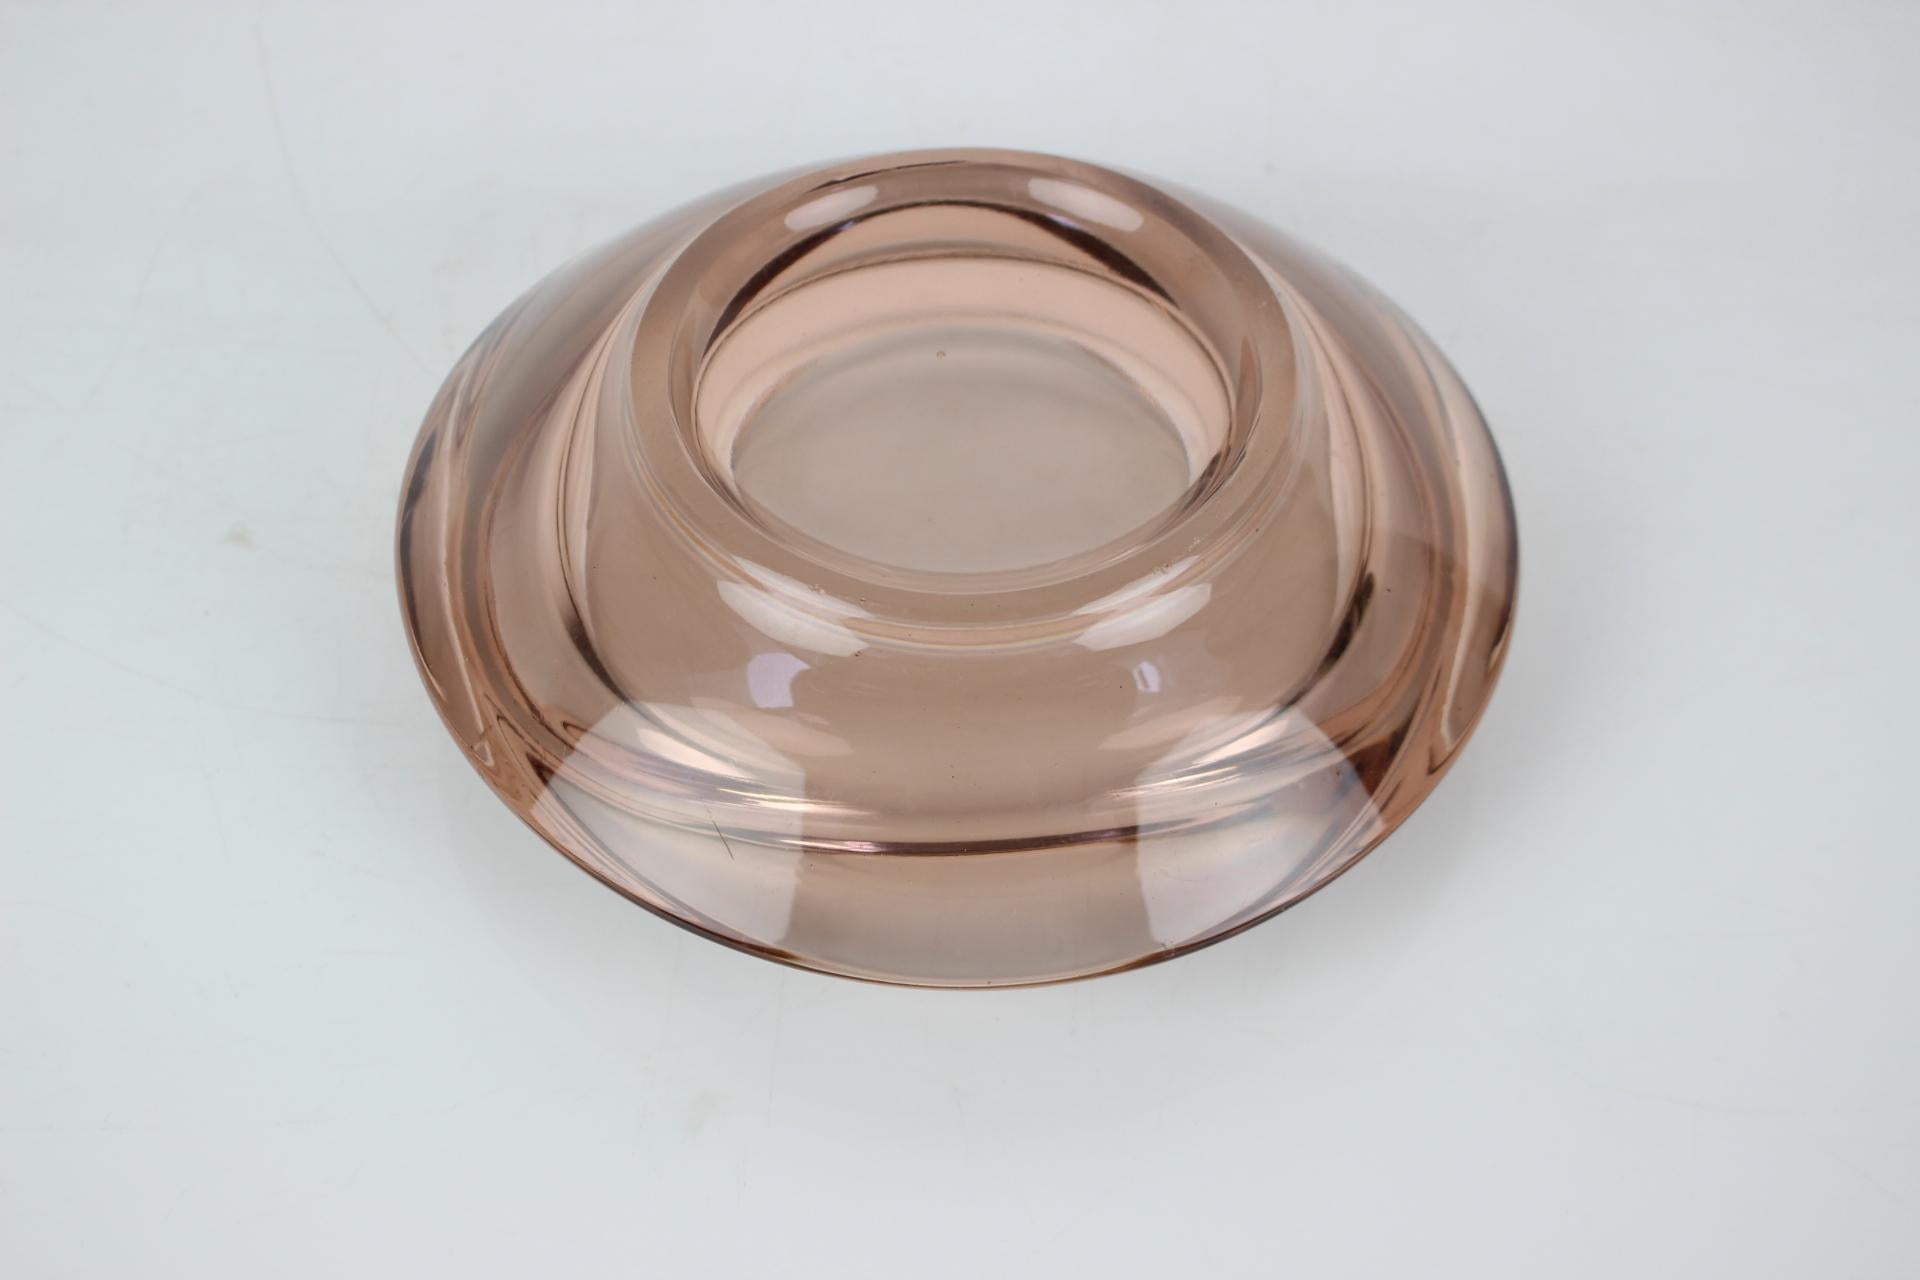 Mid-20th Century Glass Design Ashtray by Zelezny Brod Glassworks, 1960s For Sale